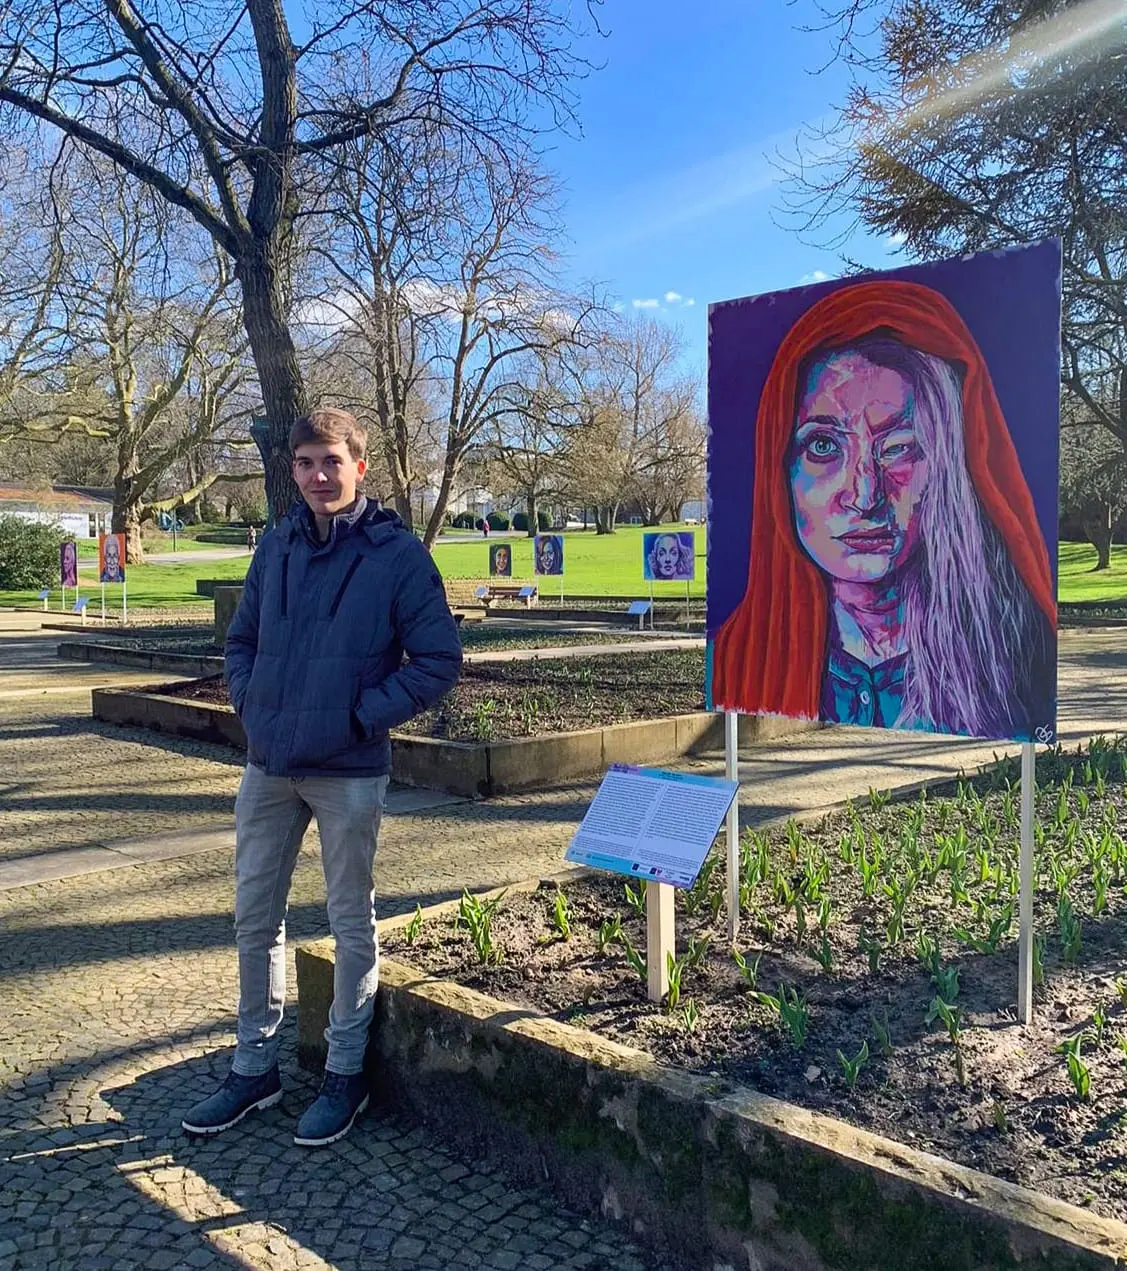 A man stands next to a colorful portrait at an outdoor exhibition.